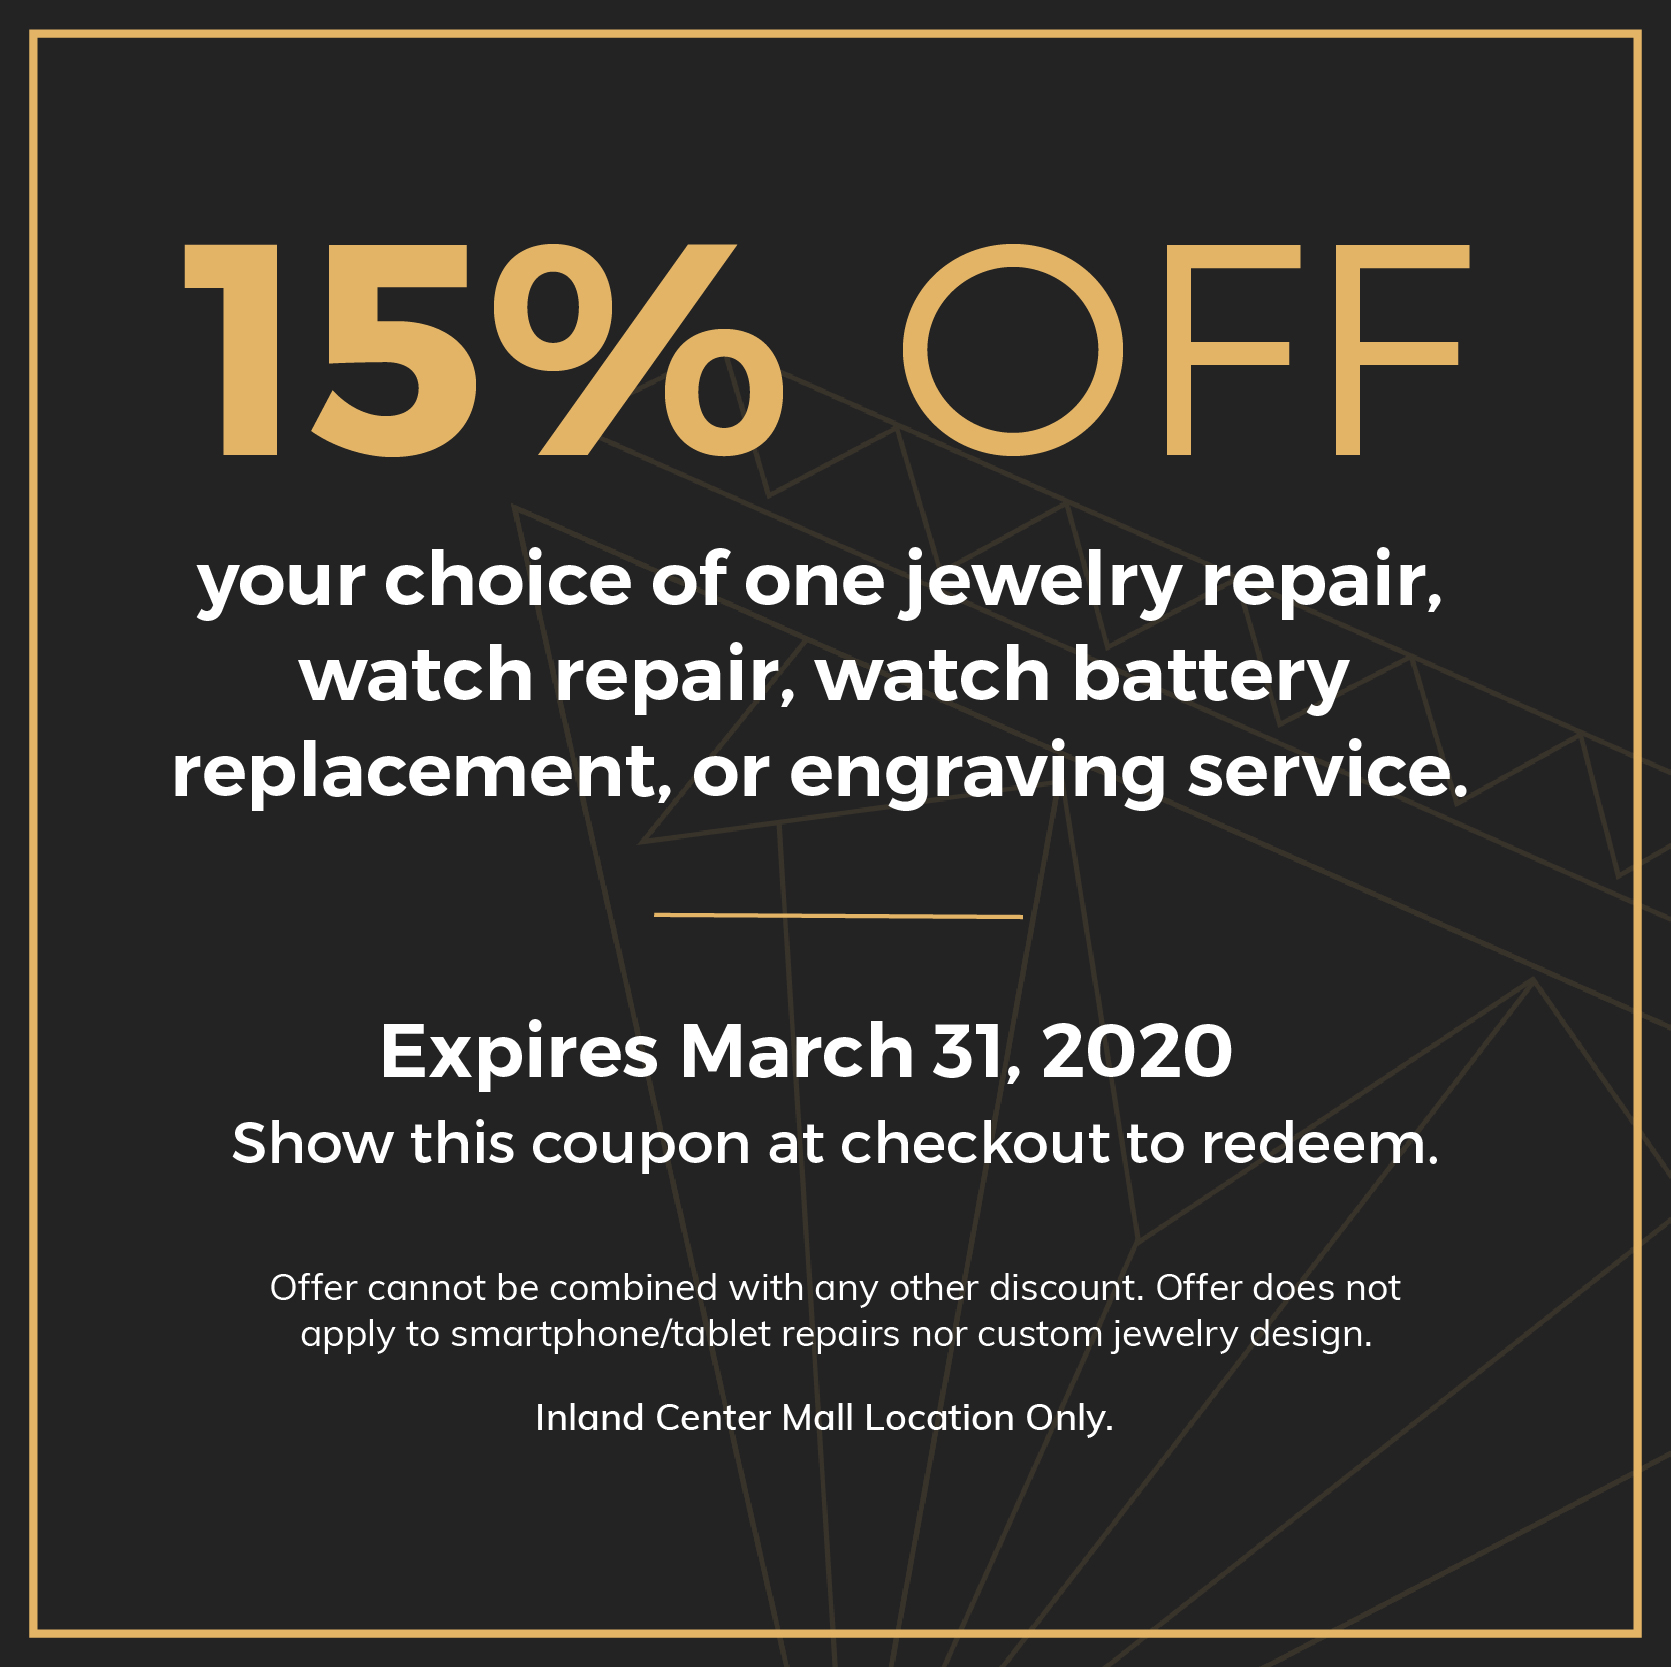 15% OFF. your choice of one jewelry repair, watch repair, watch battery replacement, or engraving service. Expires March 31, 2020. Show this coupon at checkout to redeem. Offer cannot be combined with any other discount. Offer does not apply to smartphone/tablet repairs nor custom jewelry design. Inland Center Mall Location Only.